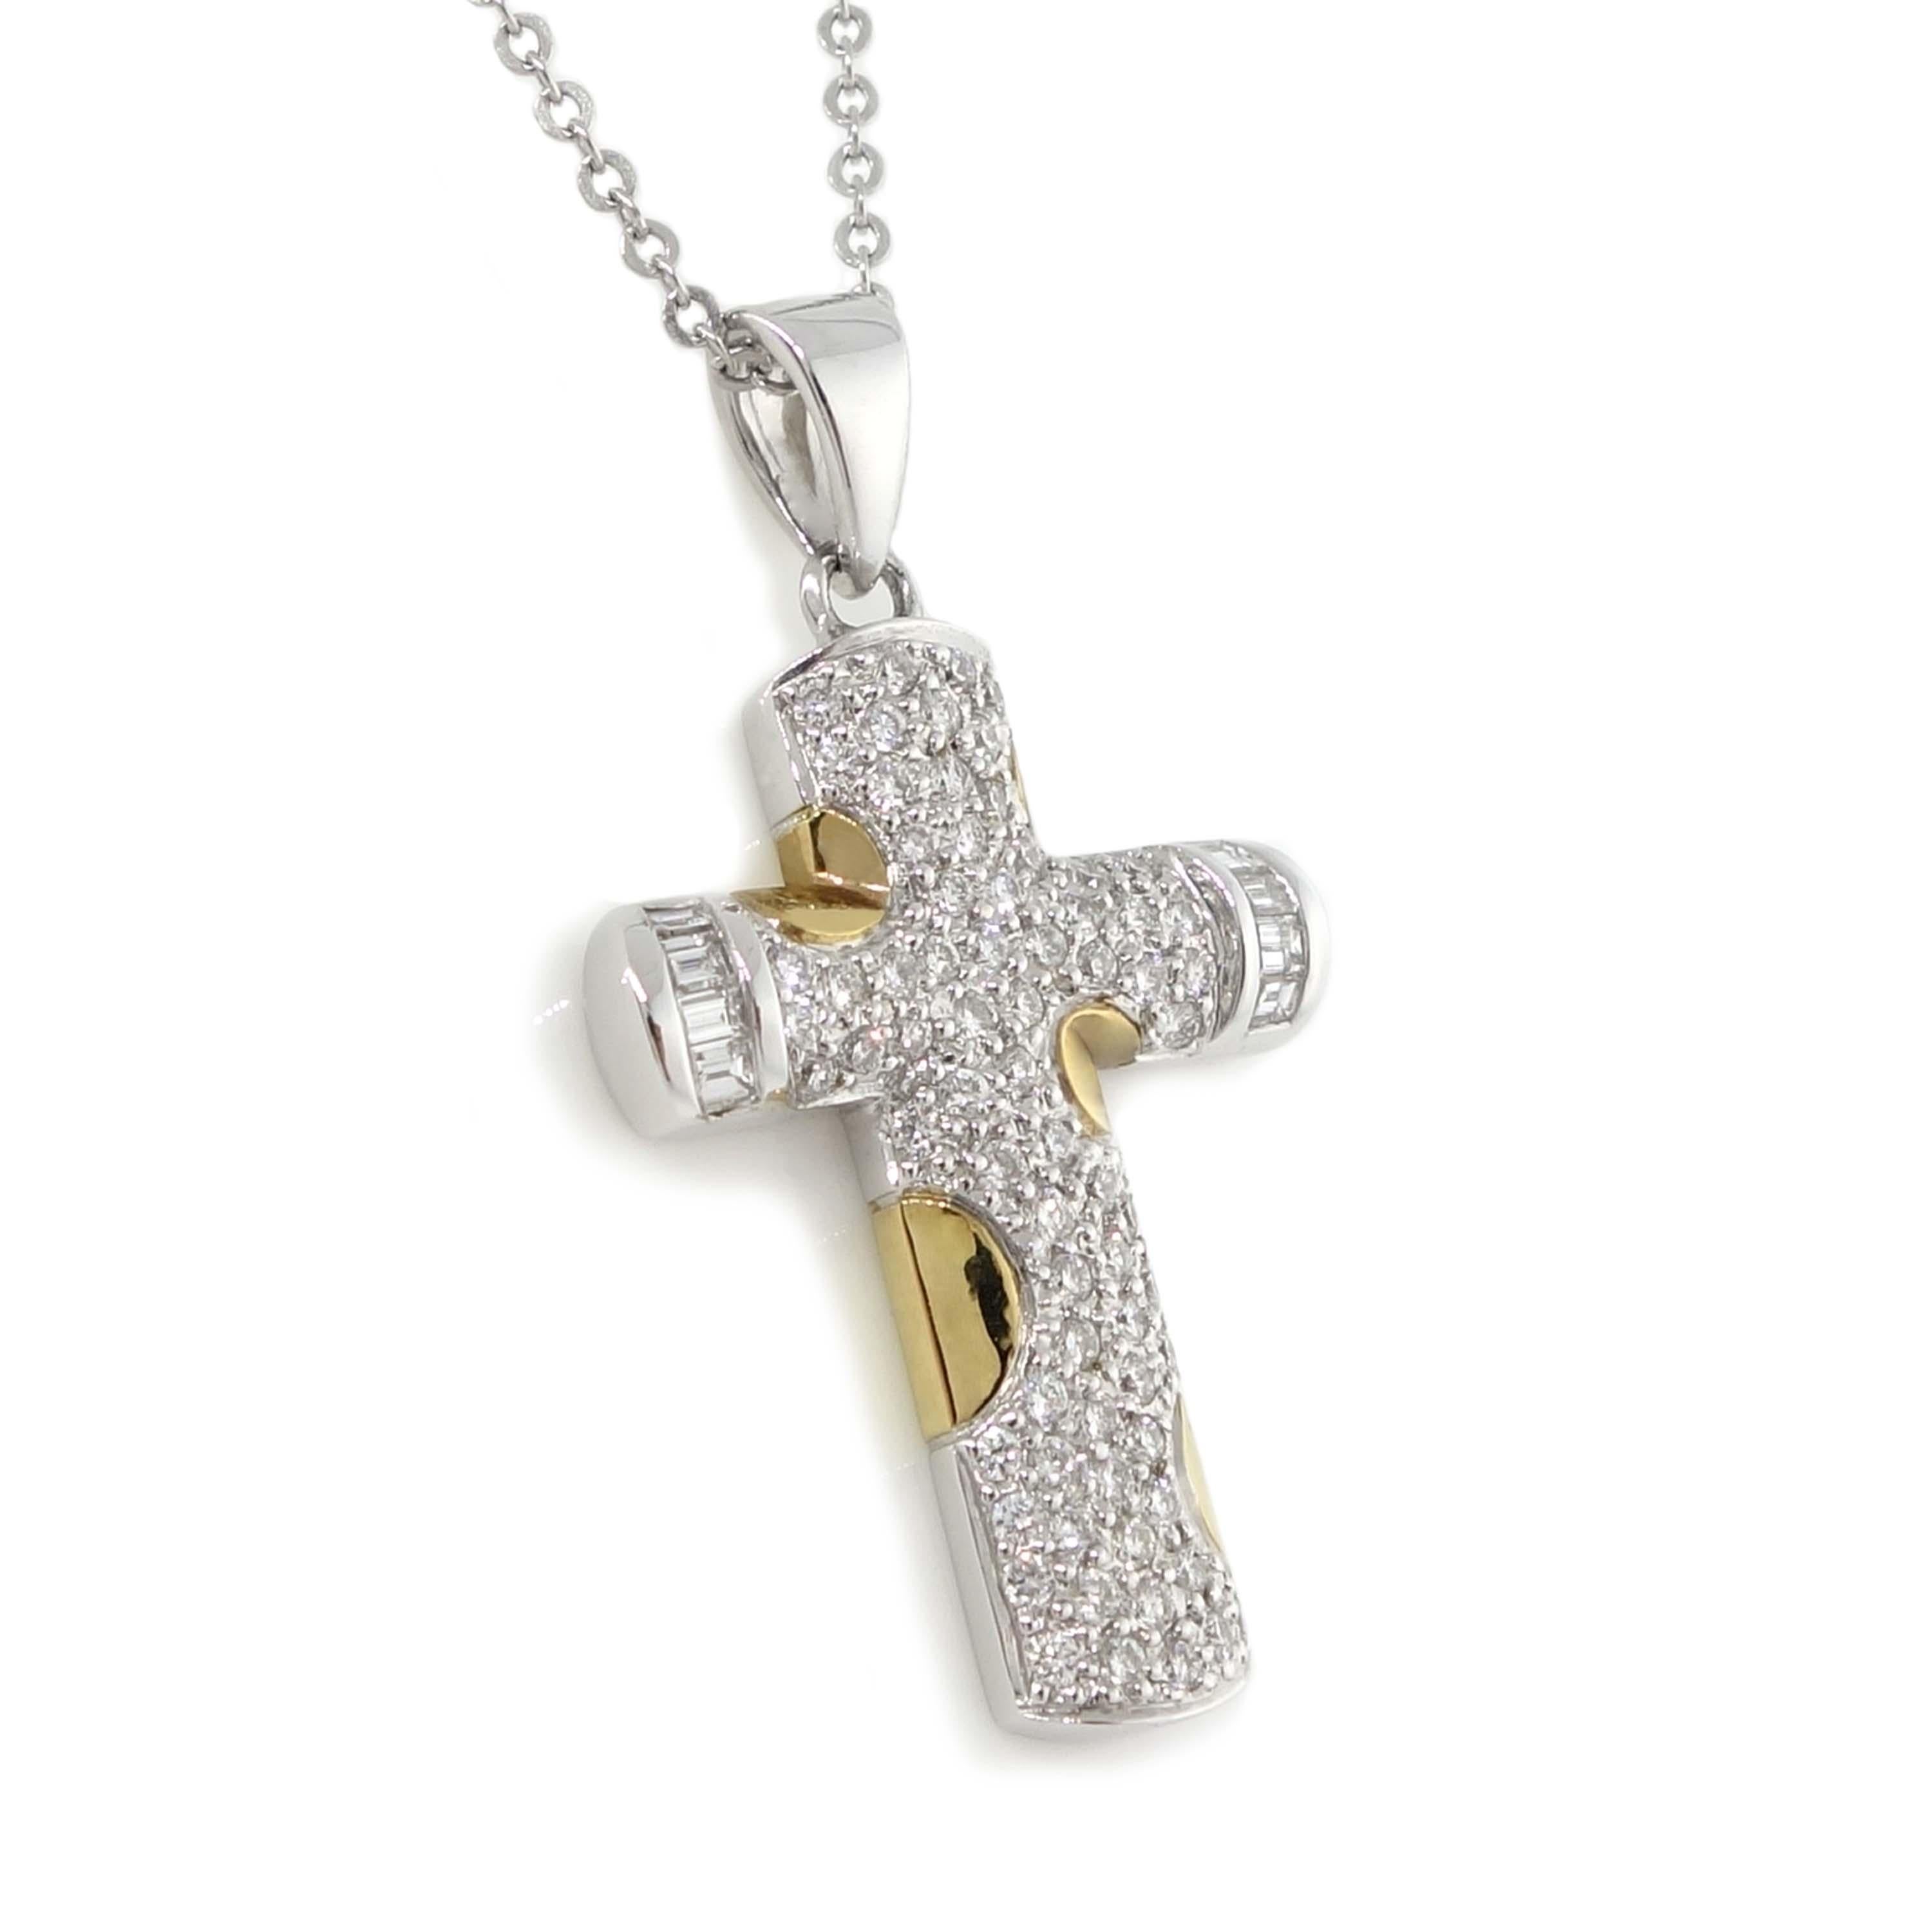 Cross pendant including 8 baguette diamonds of about 0.15 carats and 71 round brilliant cut diamonds of about 0.46 carats with a clarity of SI and color G. All diamonds are set in 18k 2 tone (White & Yellow). The total weight of the pendant is